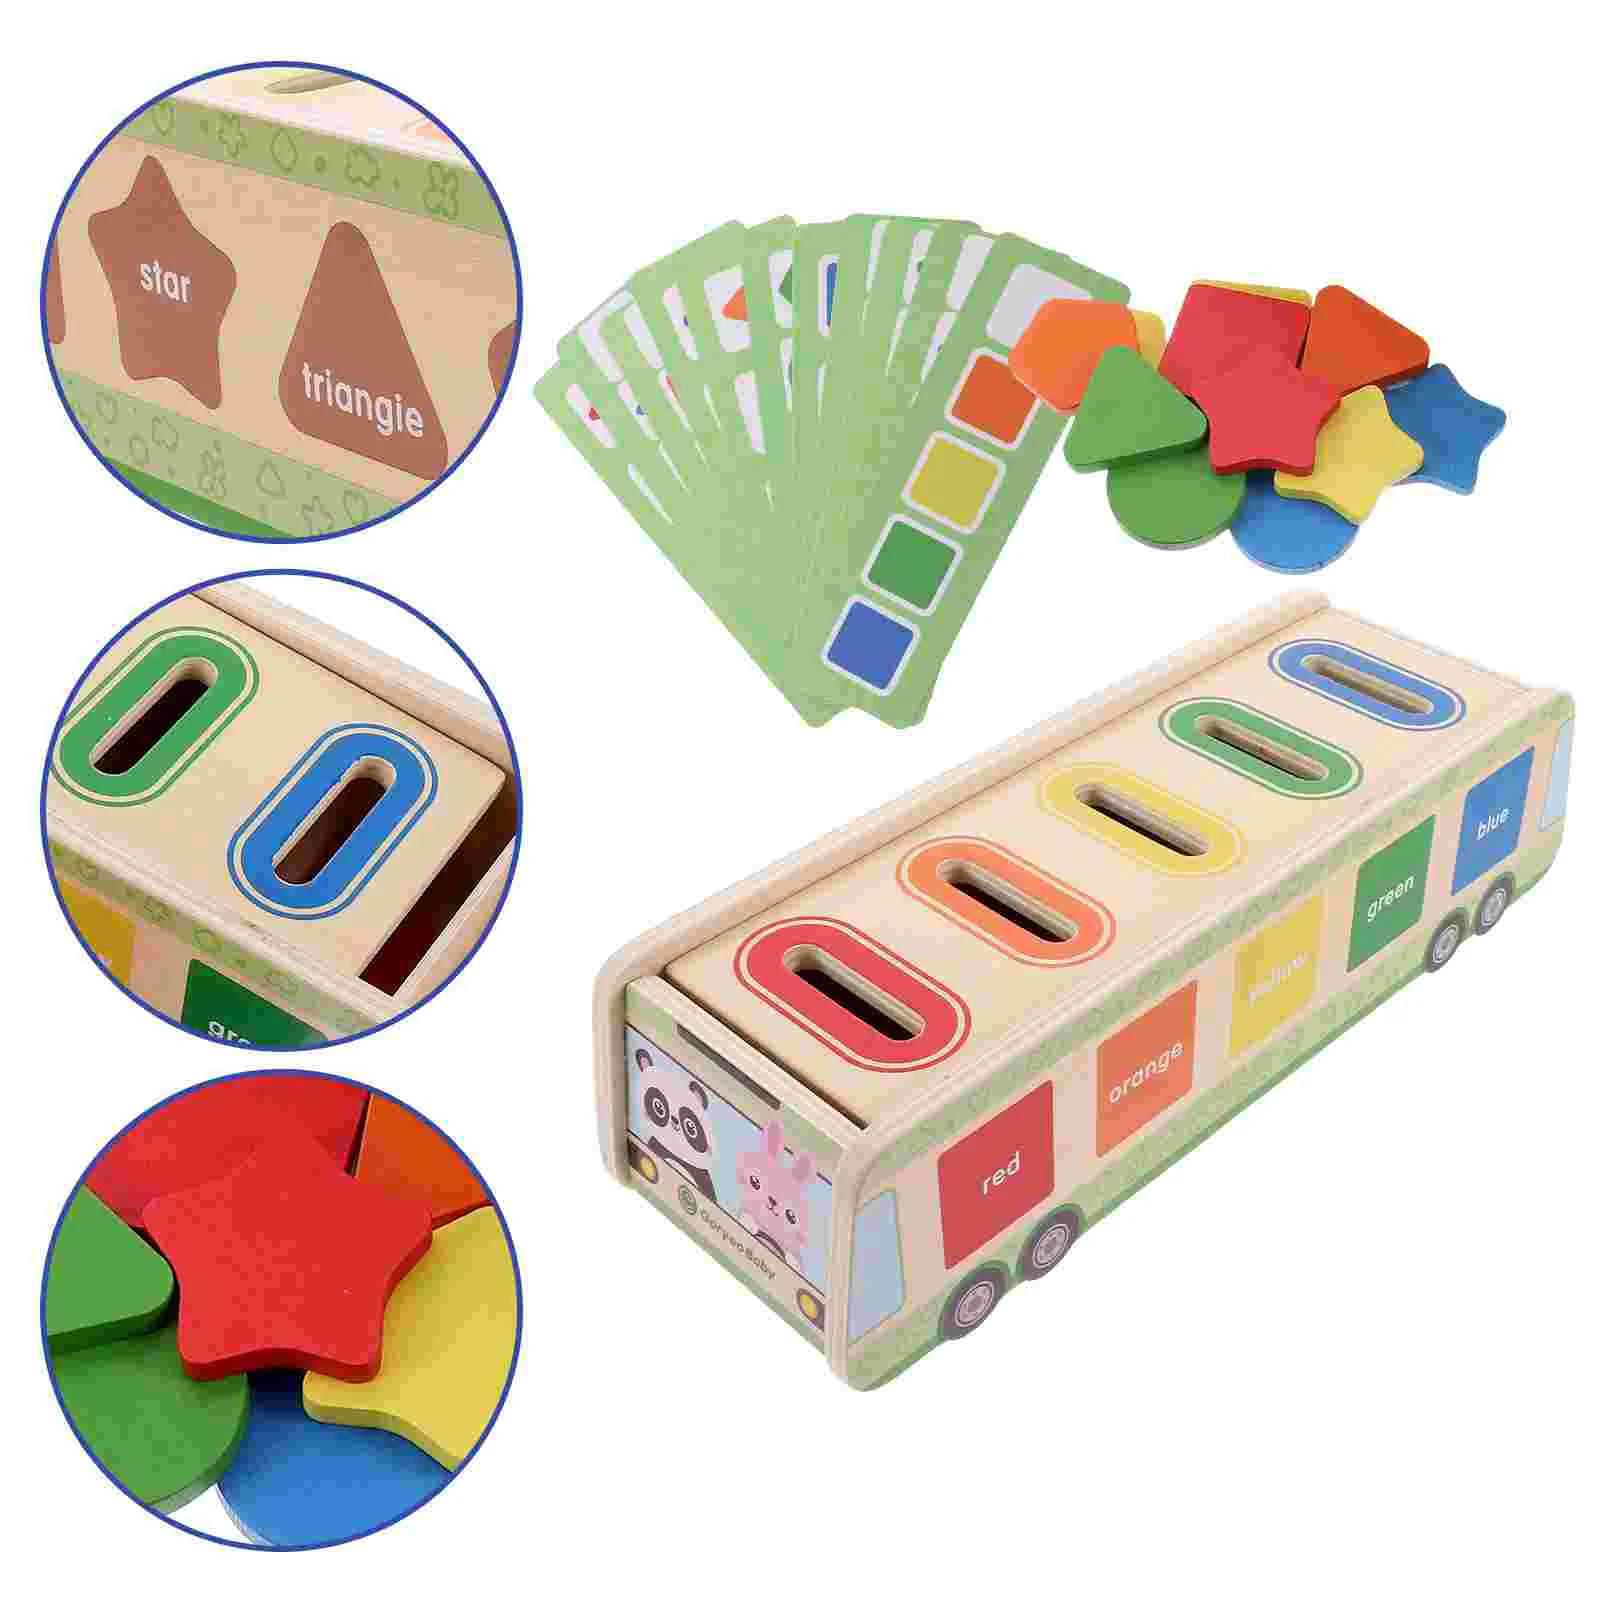 

Toys Kids Toddler Sensory Shape Portable Matching Color Cognition Wooden Learning Playthings Developmental